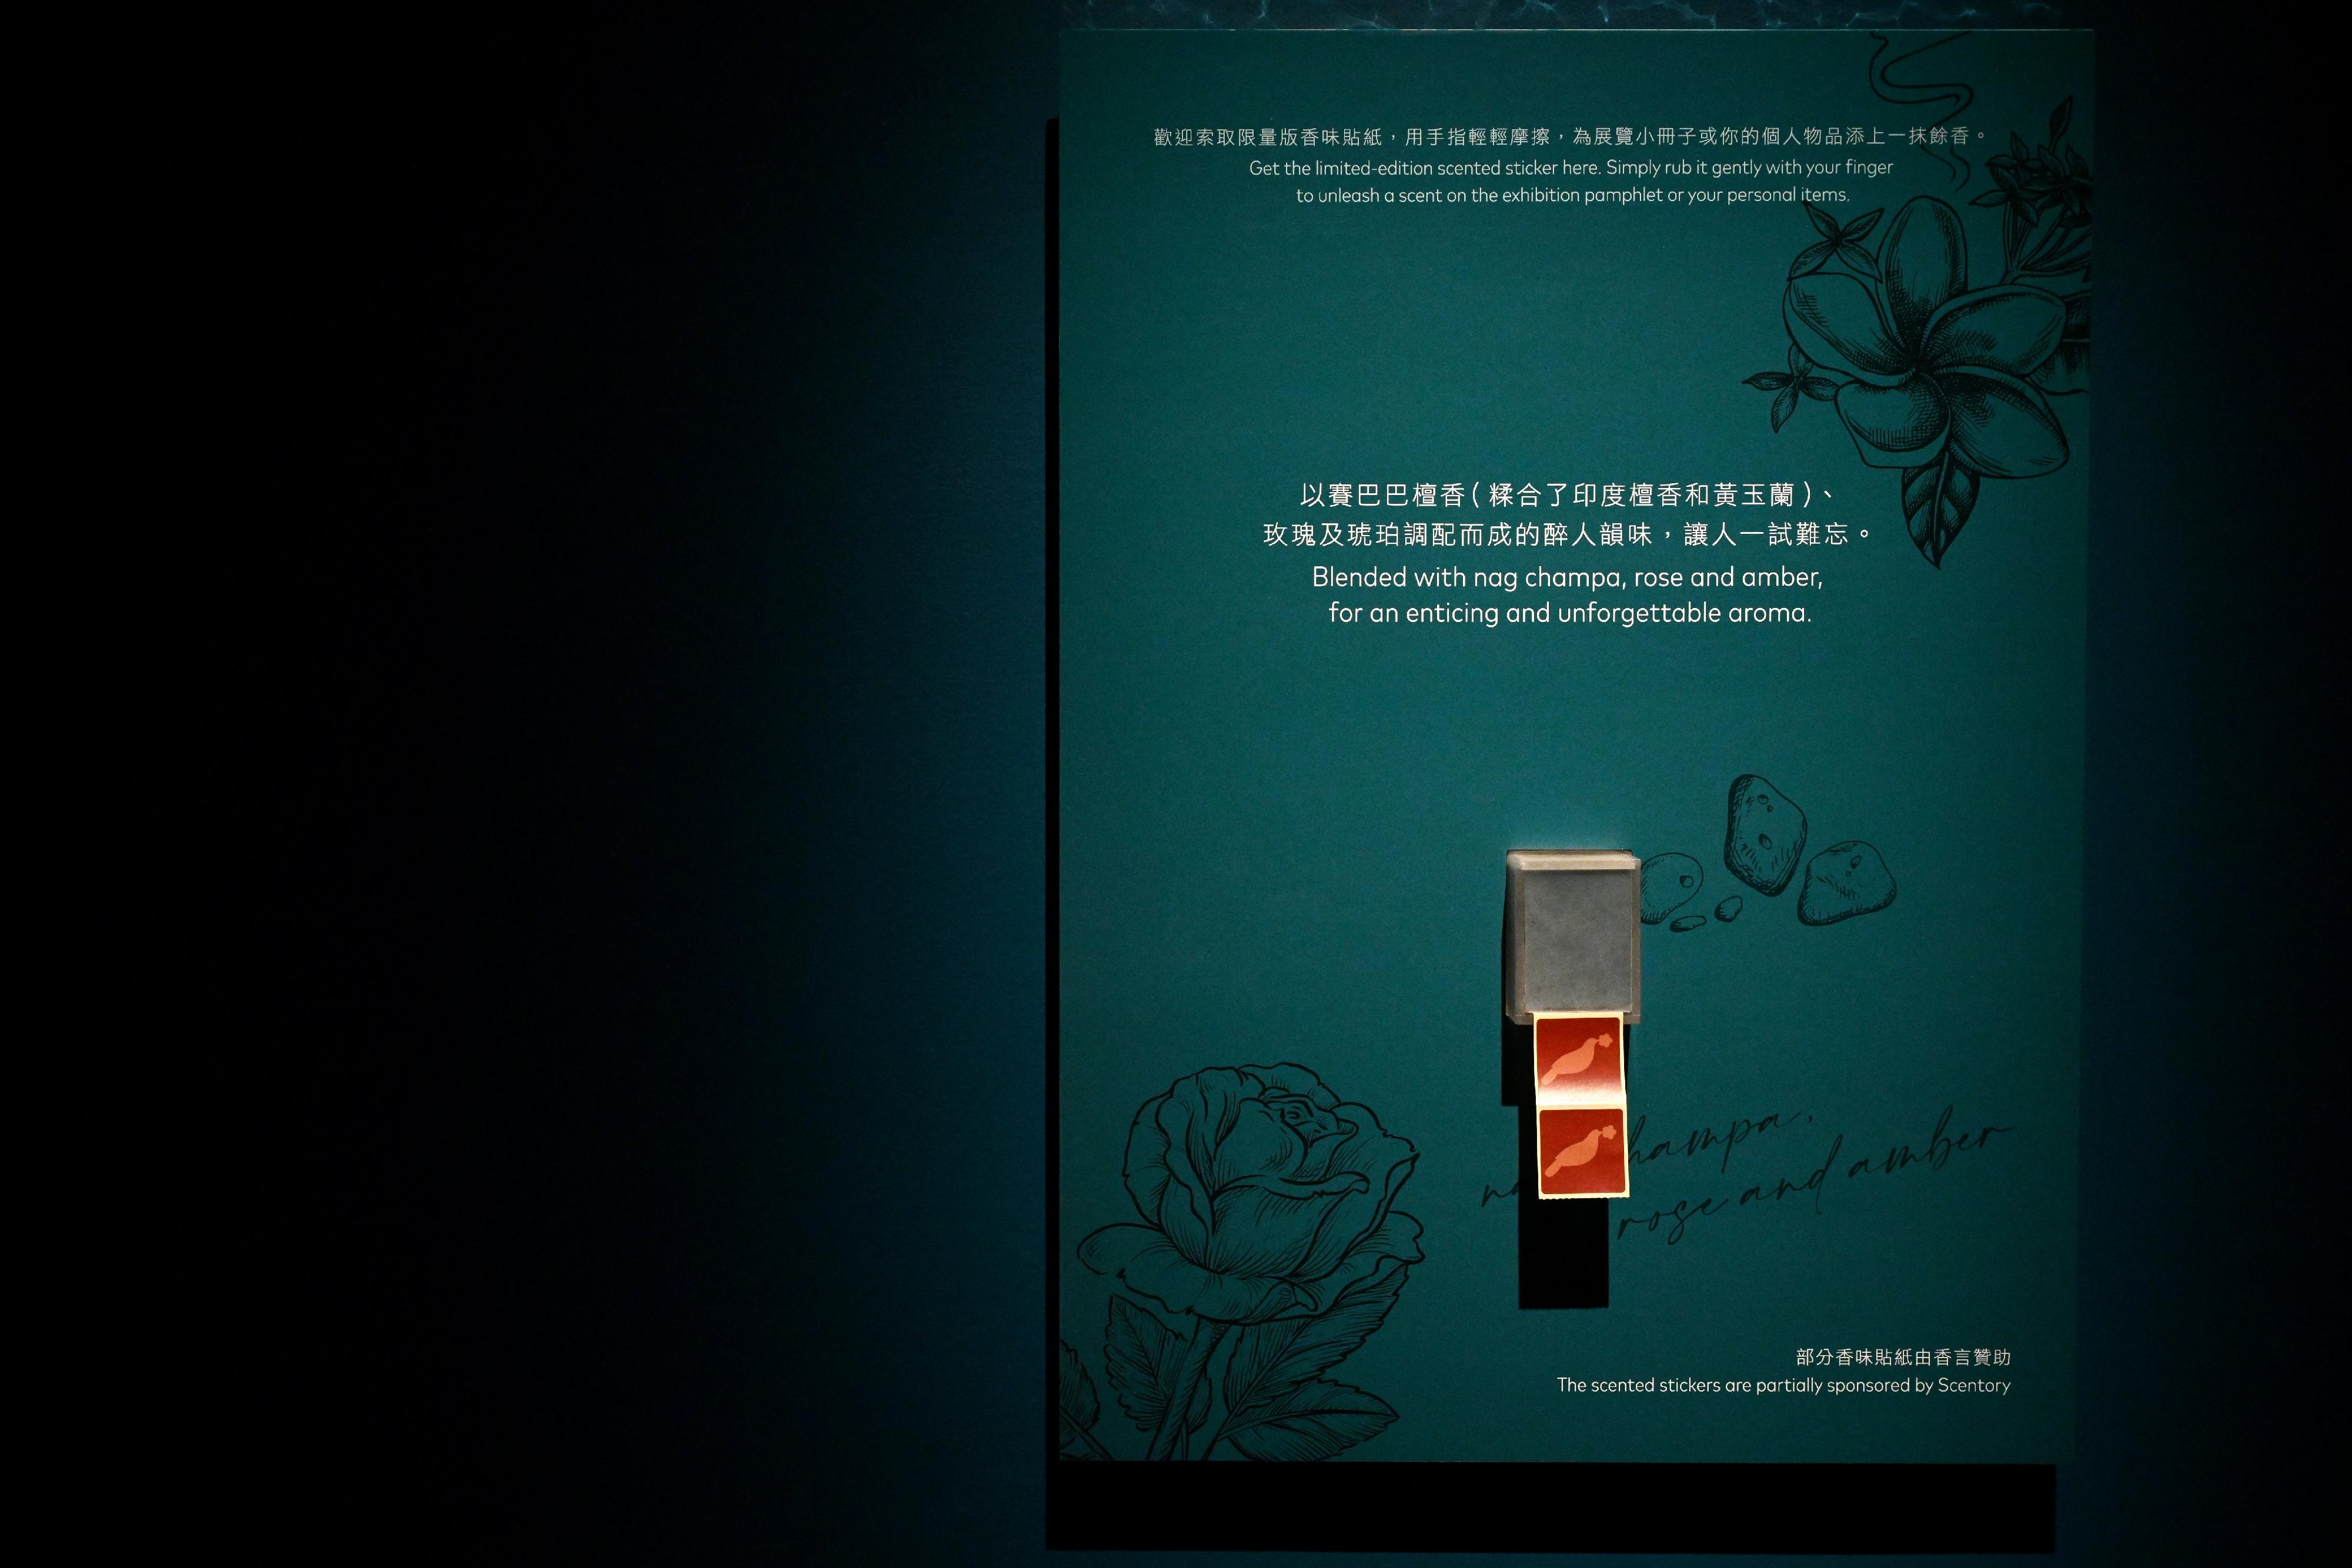 "Art Personalised: Masterpieces from the Hong Kong Museum of Art" exhibition will be held at the Hong Kong Museum of Art from tomorrow (June 30). Exclusive scents are crafted for different personality types, and limited edition of scented stickers will be distributed in the gallery, offering visitors a unique and personalised aesthetic journey.
